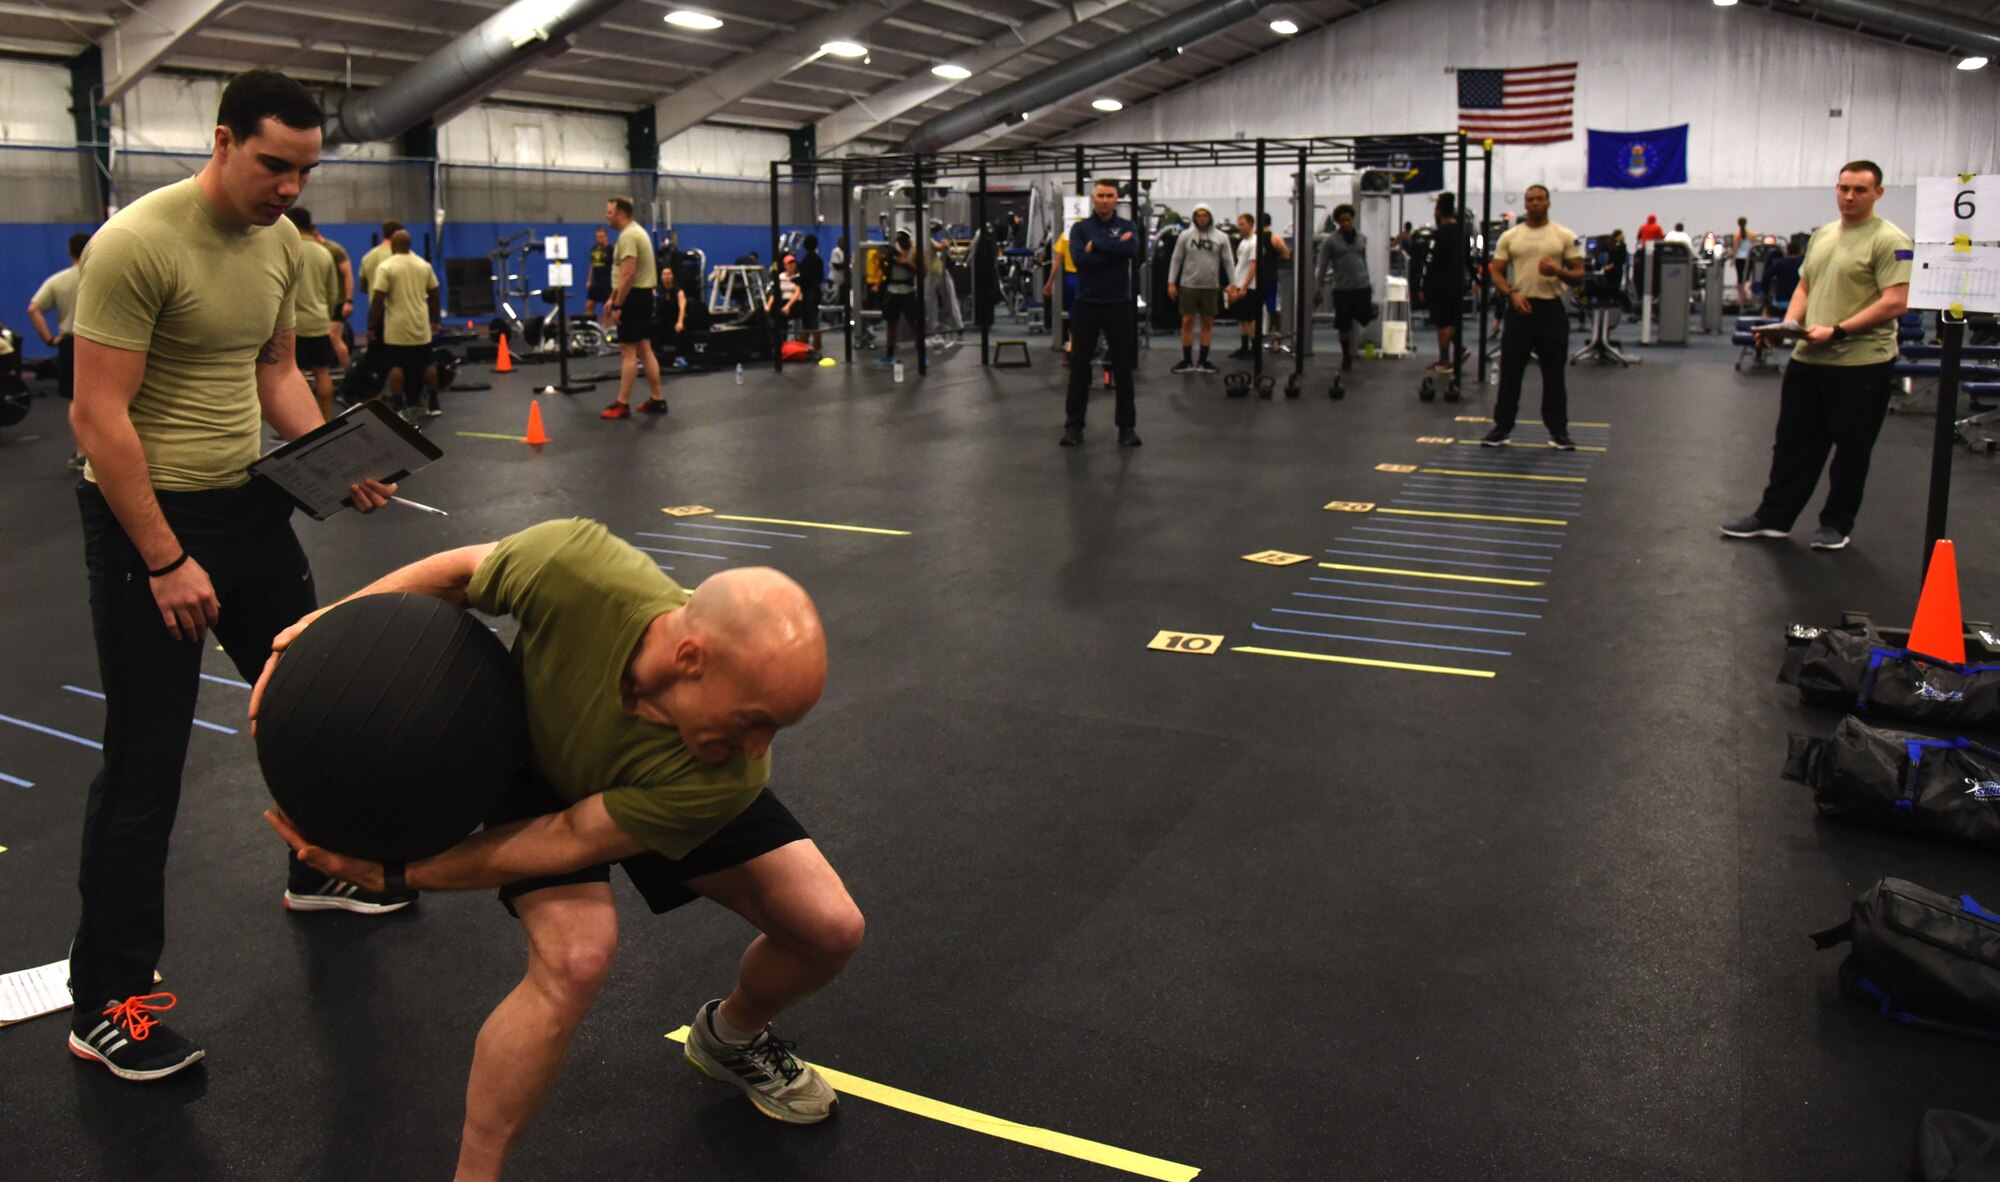 Senior Master Sgt. Kenneth Blakeney (second from left), 9th Air Support Operations Squadron, Fort Hood, Texas, launches a medicine ball at the fitness center at Joint Base Andrews, Md., Jan. 9, 2018. (U.S. Air Force photo by Staff Sgt. Joe Yanik)